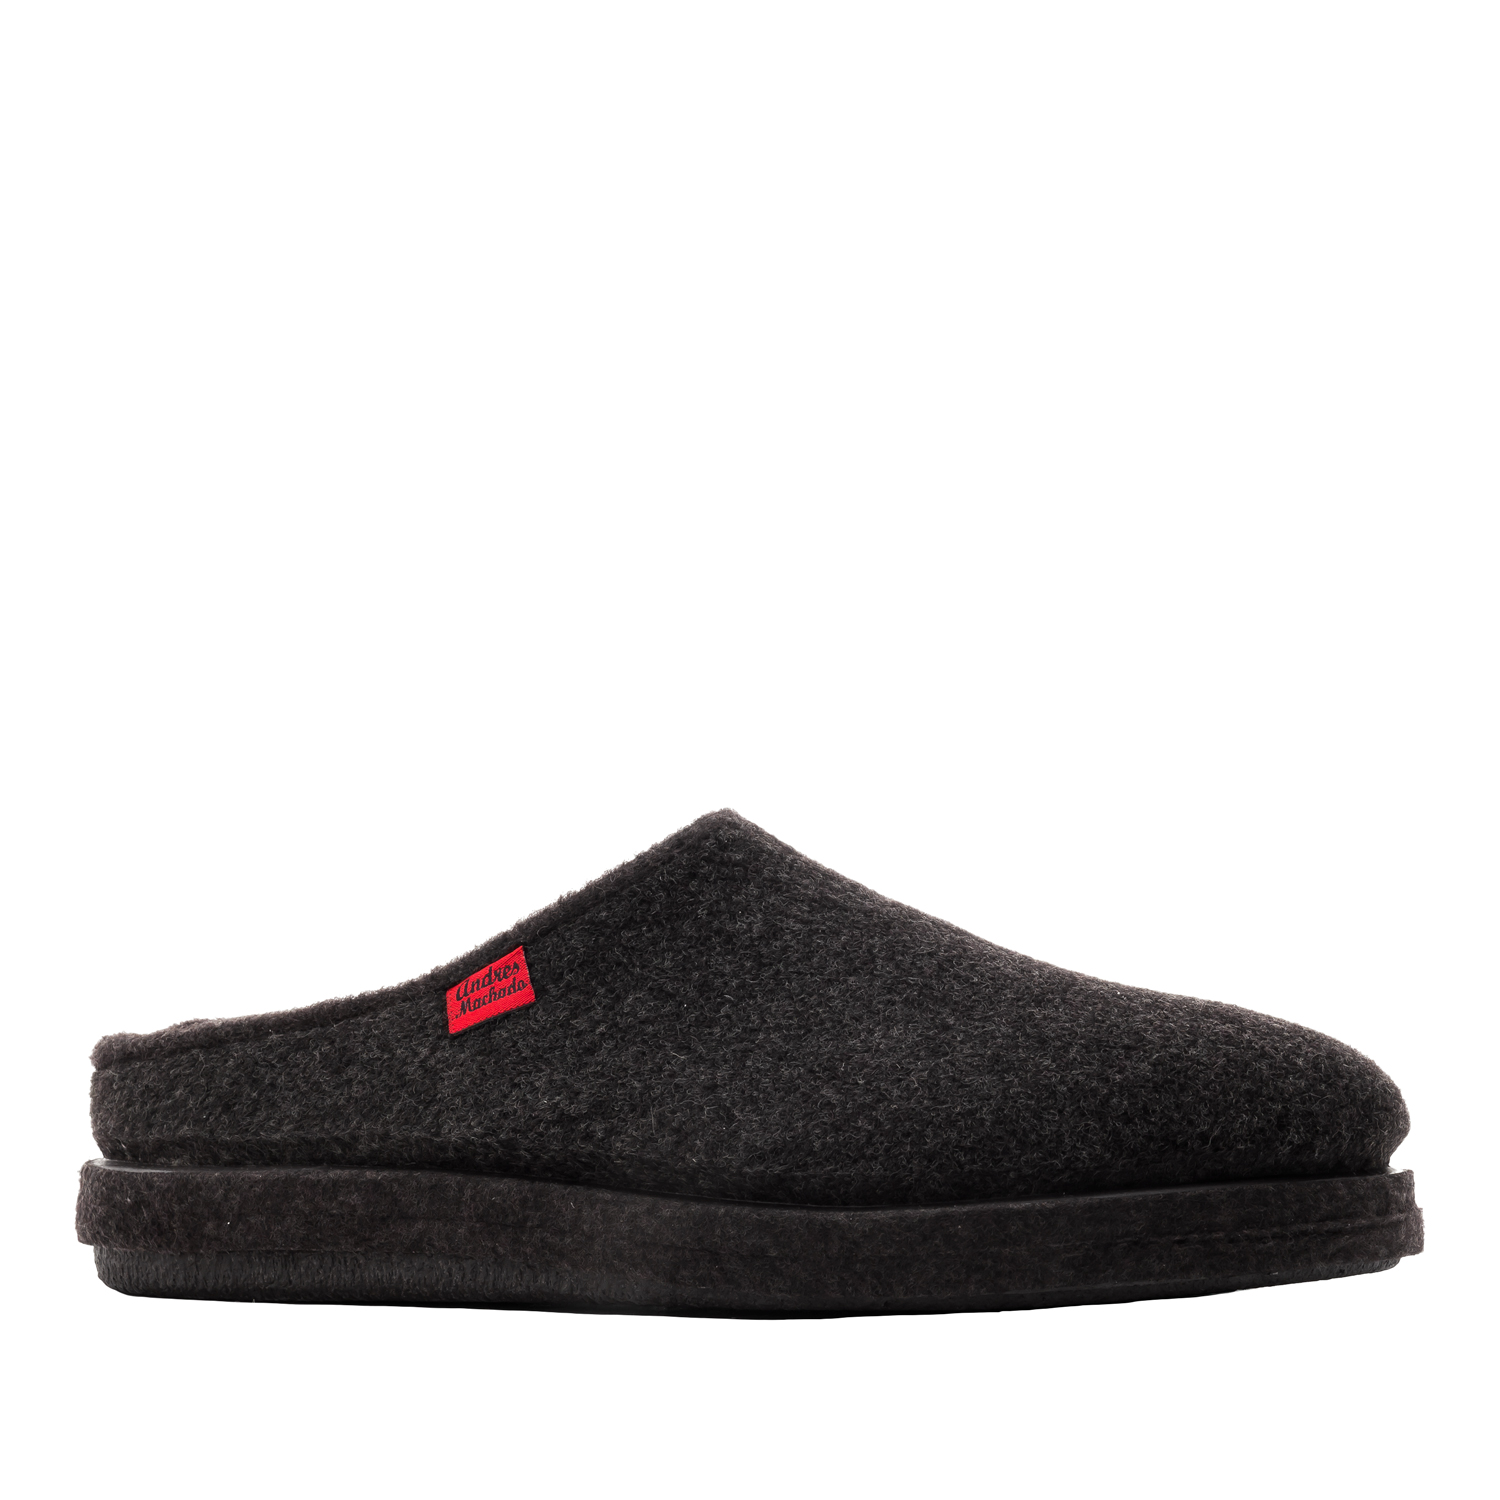 Very comfortable Felt Slippers in colour Anthracite with footbed 